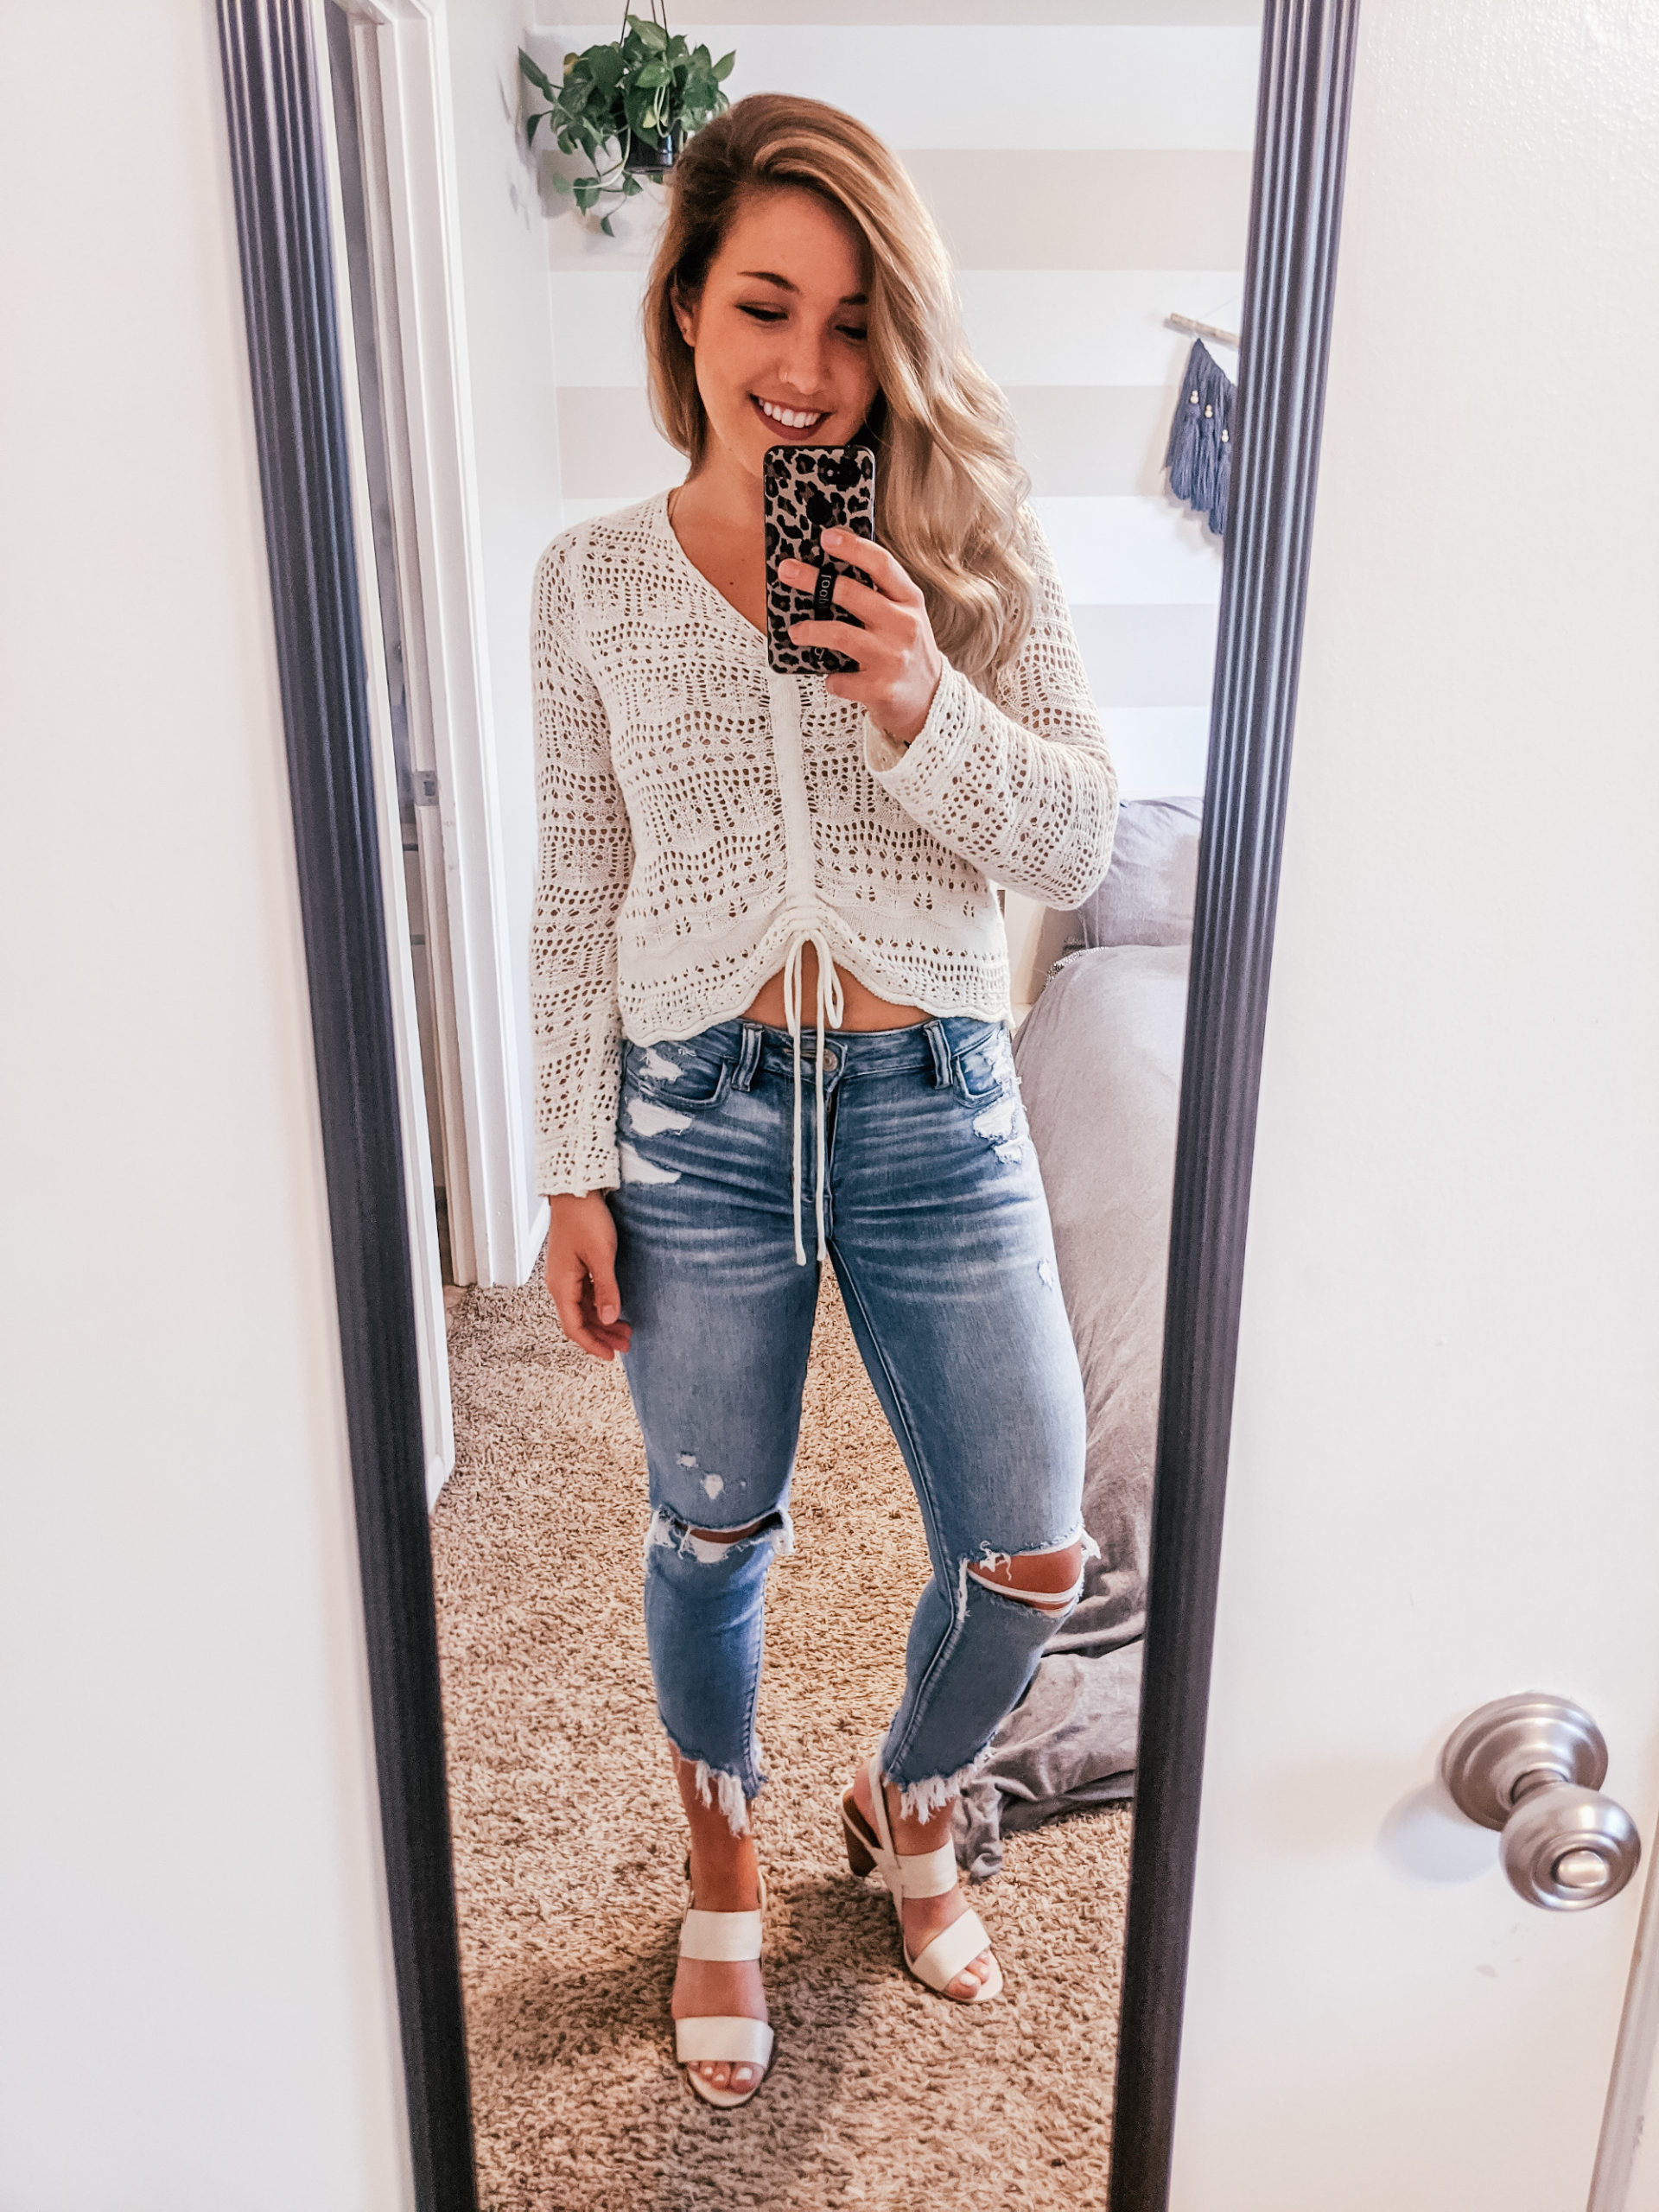 Classy Summer Outfit | gold blouse, cropped jeans and block heels | SAVE  for your next outfit idea and SWIPE for full outfit details To… | Instagram